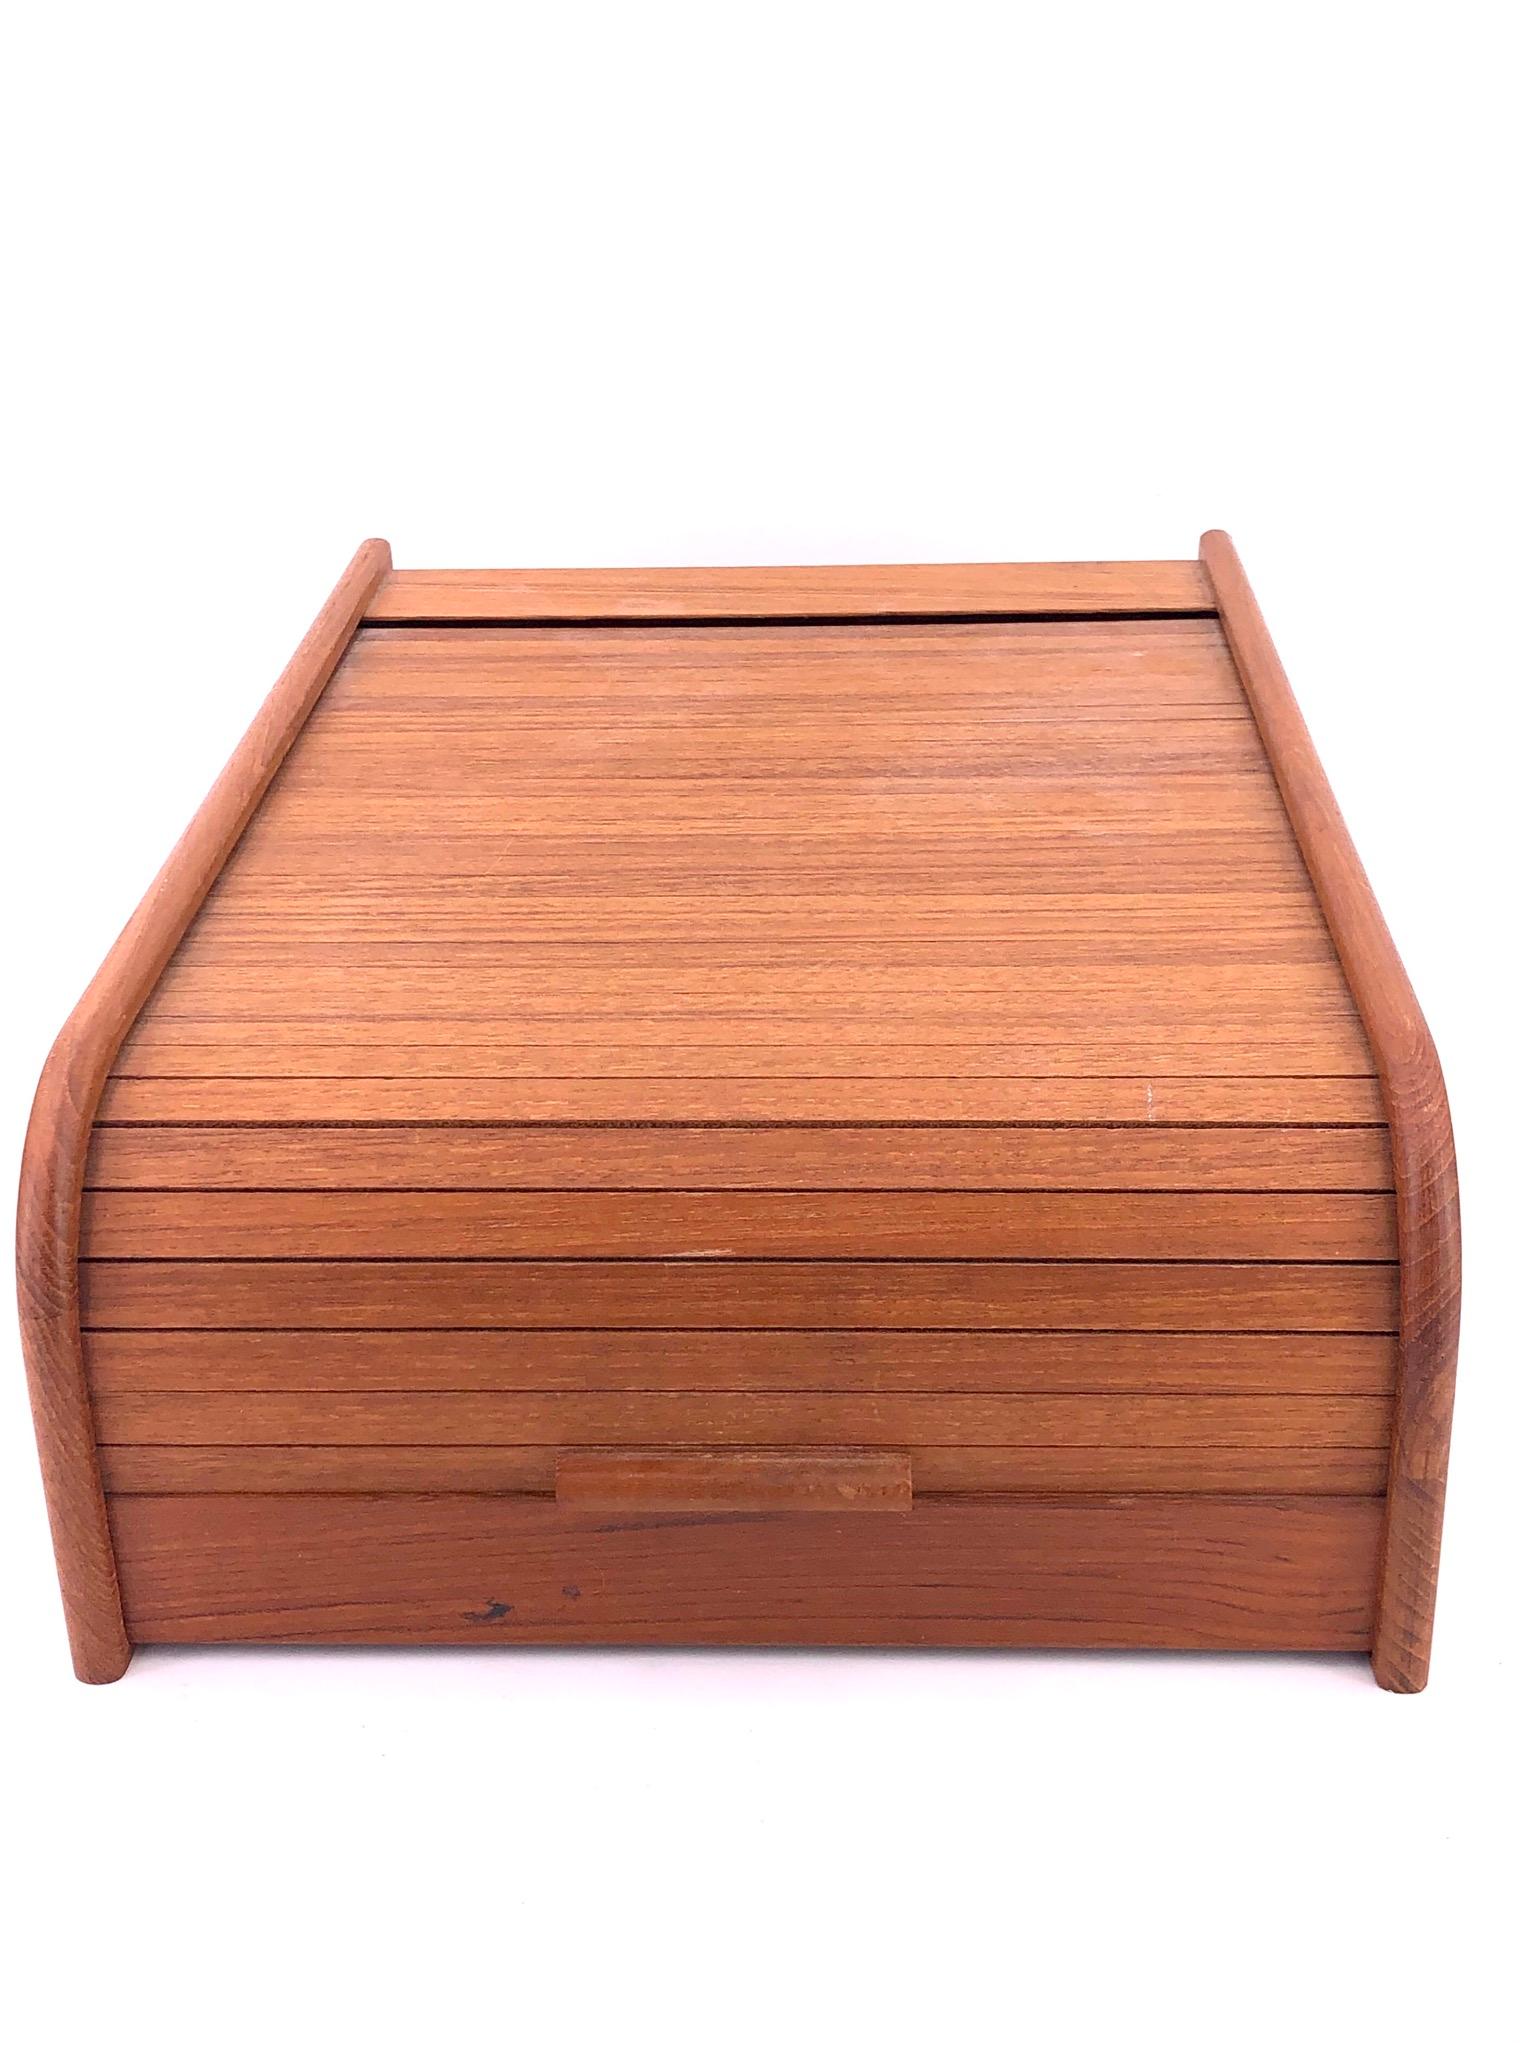 Danish modern solid teak tambour door trinket box, beautiful well crafted box desk top great for small storage. With roll top.
 